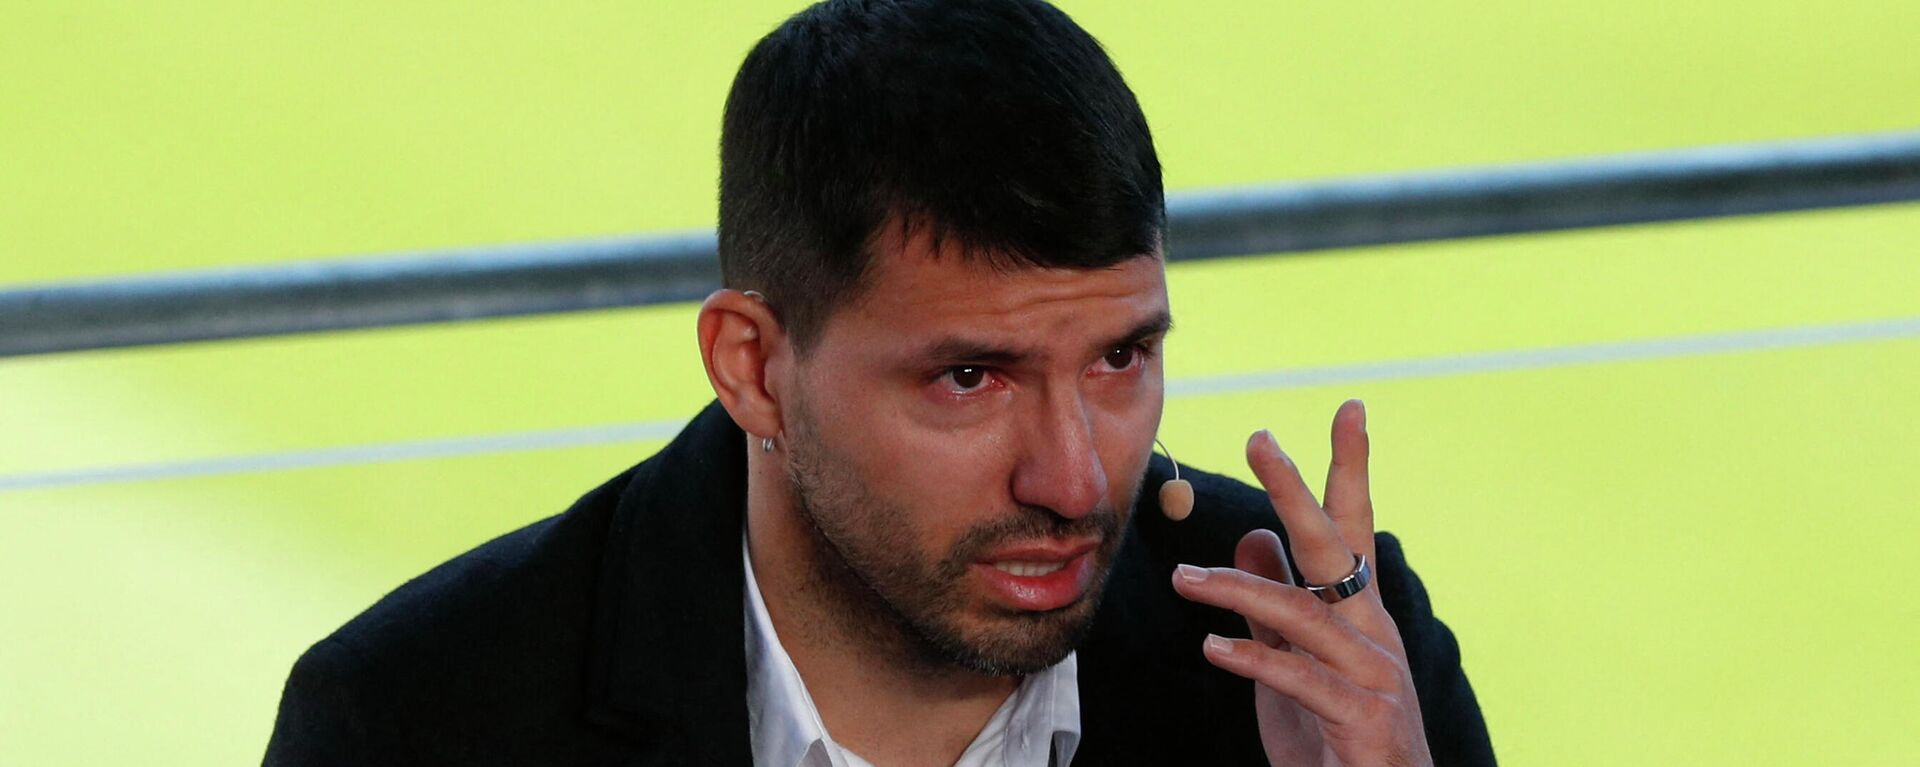 Soccer Football - FC Barcelona - Sergio Aguero Press Conference - Camp Nou, Barcelona, Spain - December 15, 2021 FC Barcelona's Sergio Aguero reacts after announcing his retirement from football during the press conference - Sputnik International, 1920, 15.12.2021